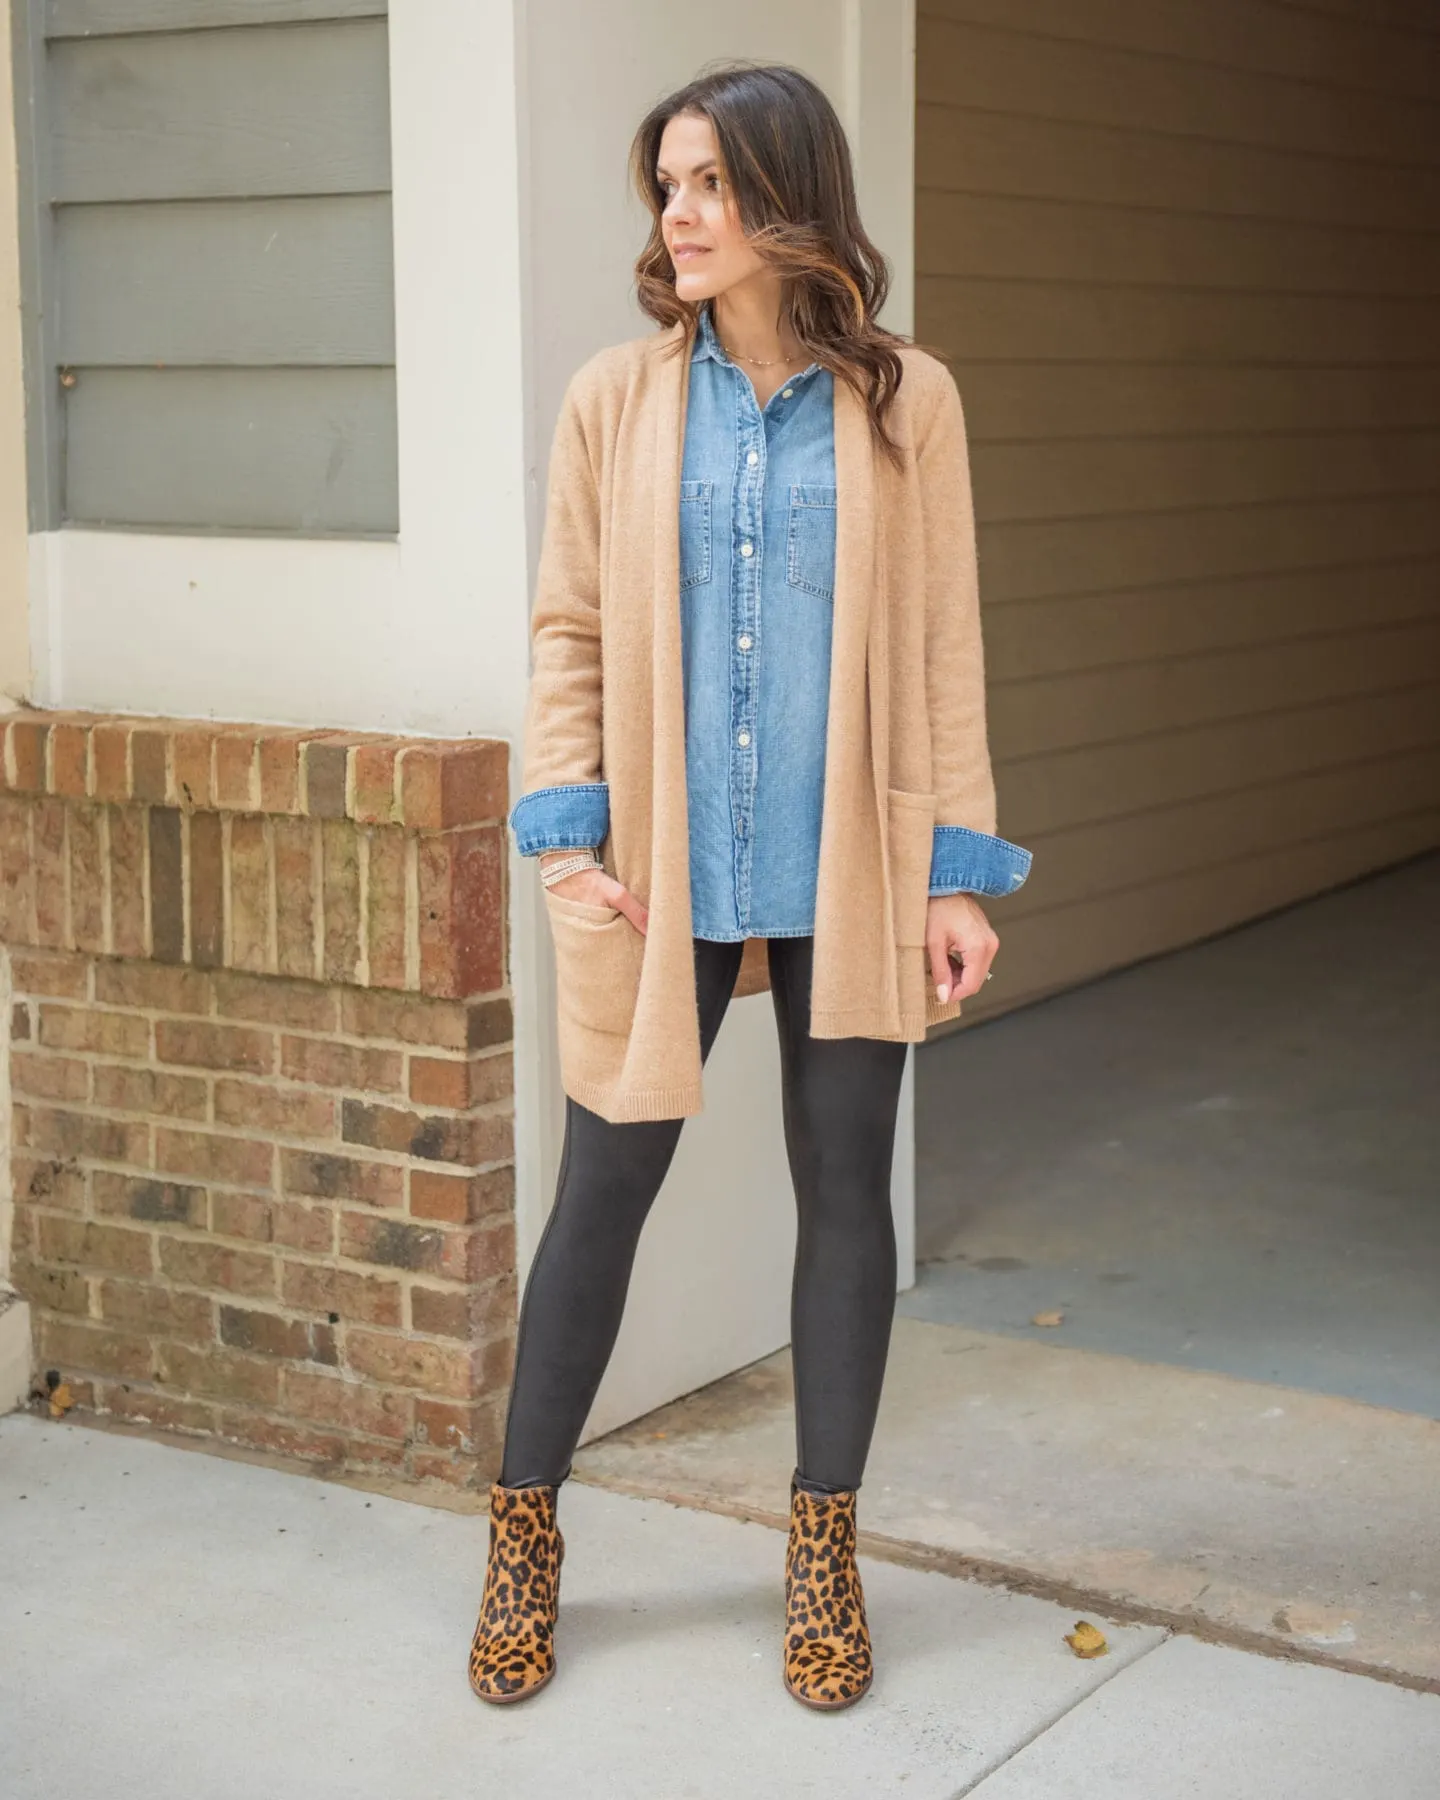 Fall Fashion Essentials 2020 For Women Over 40